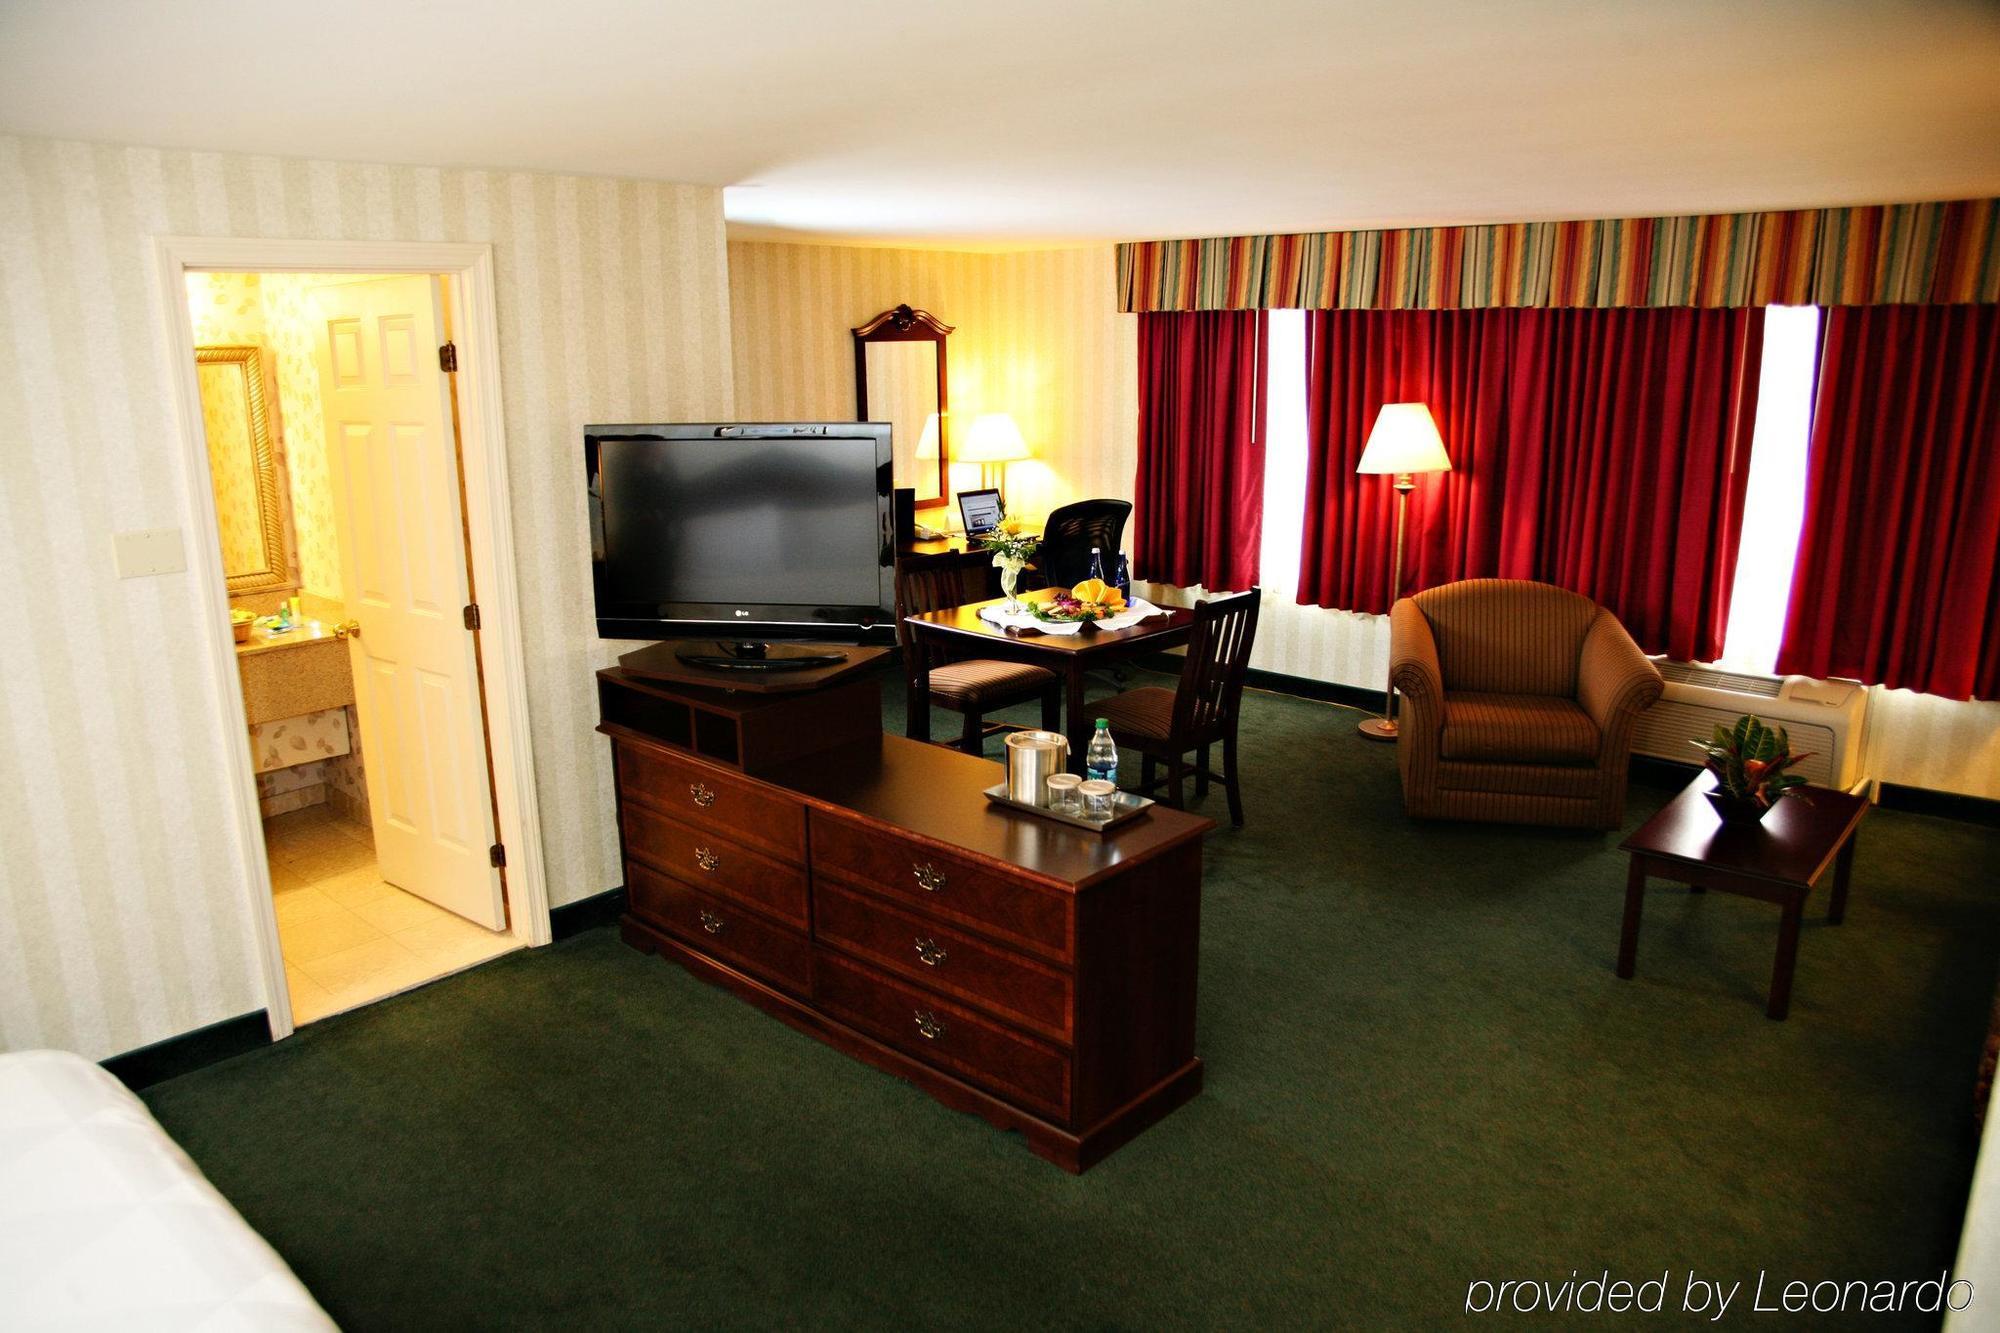 Radisson Hotel And Suites Chelmsford-Lowell Kamer foto